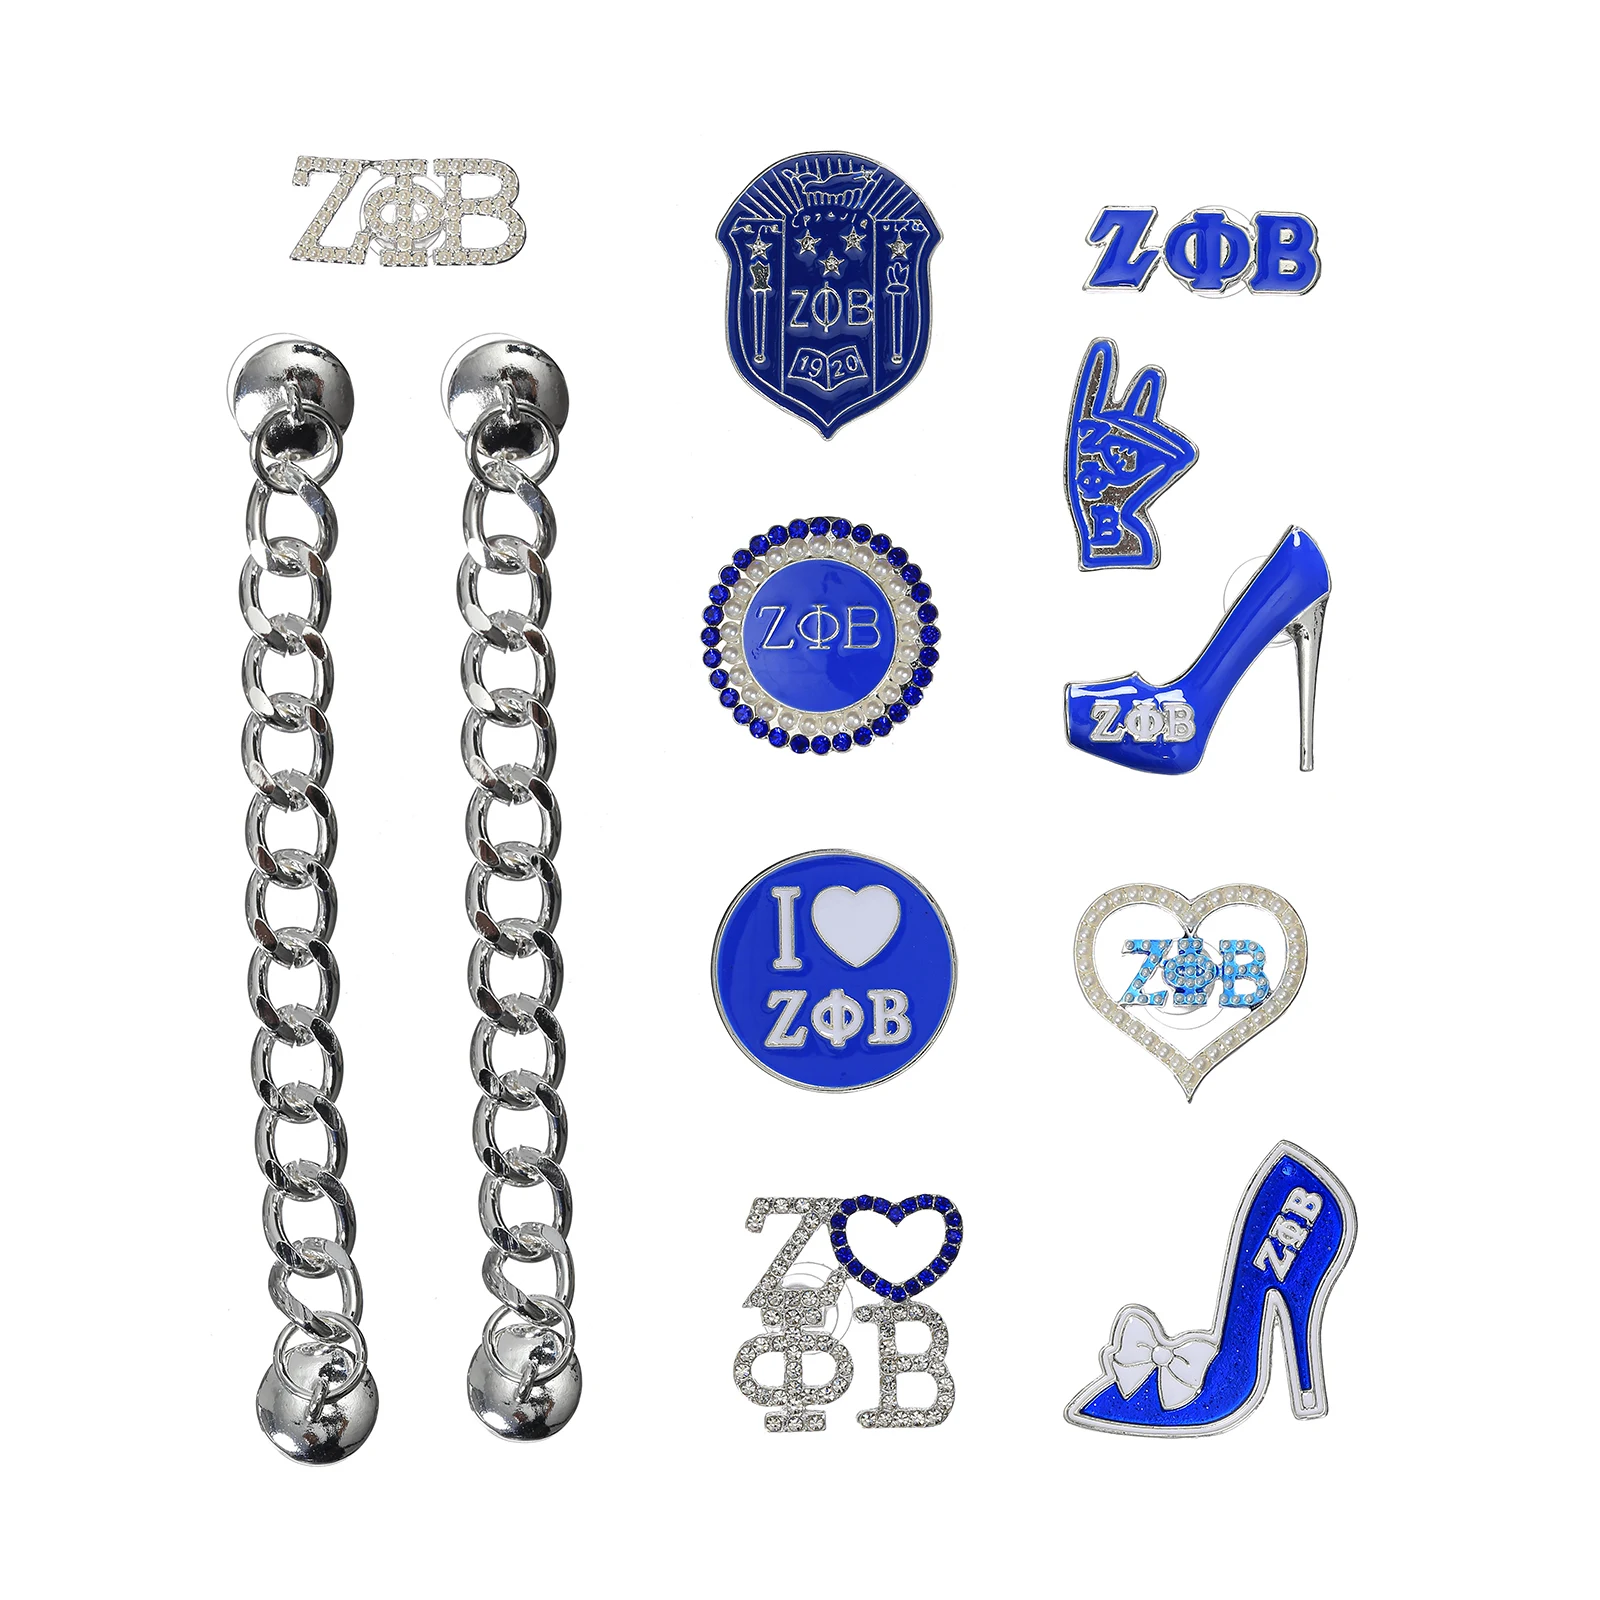 12pcs Aolly ZΦB Sorority Shoe Charms Set Accessories Decorations Croc Jibz Buckle for DIY X-mas Gift CBC162